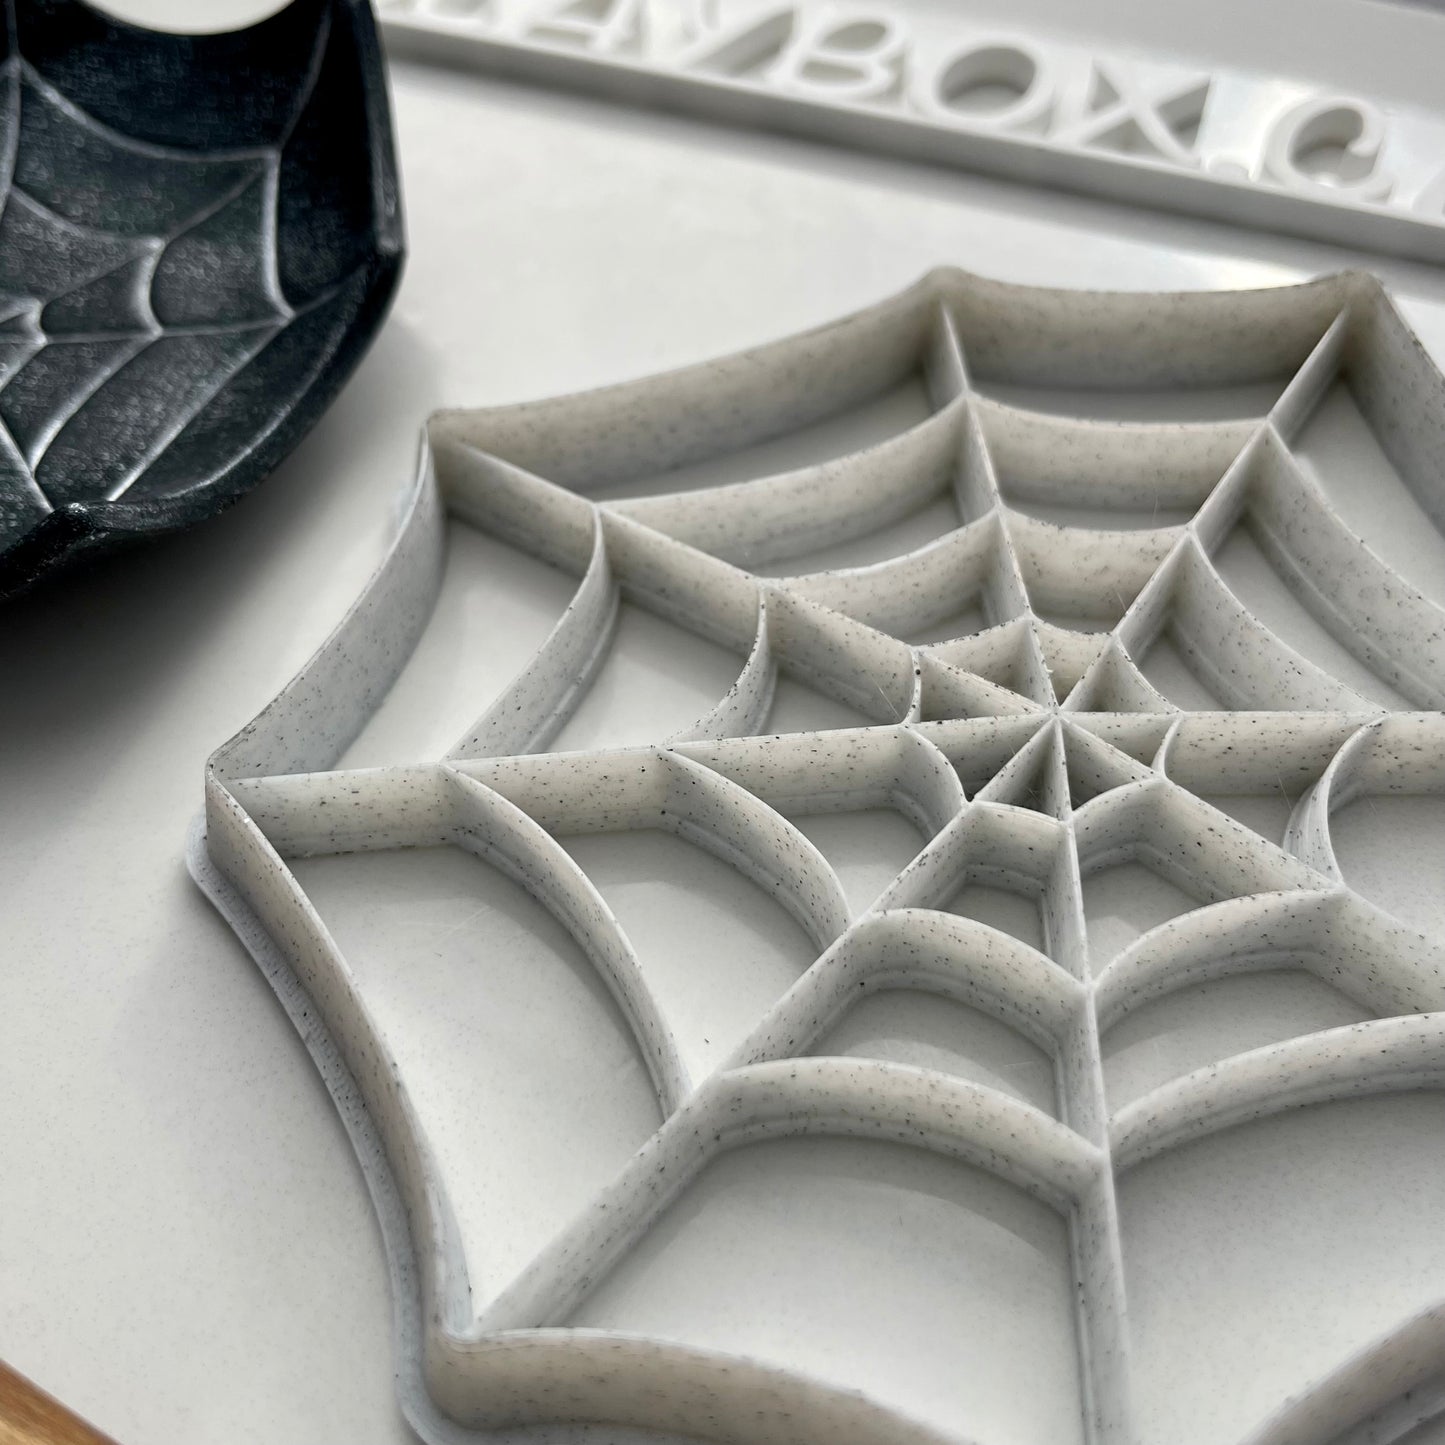 Spider web large cutter - perfect for making ring dishes or coasters